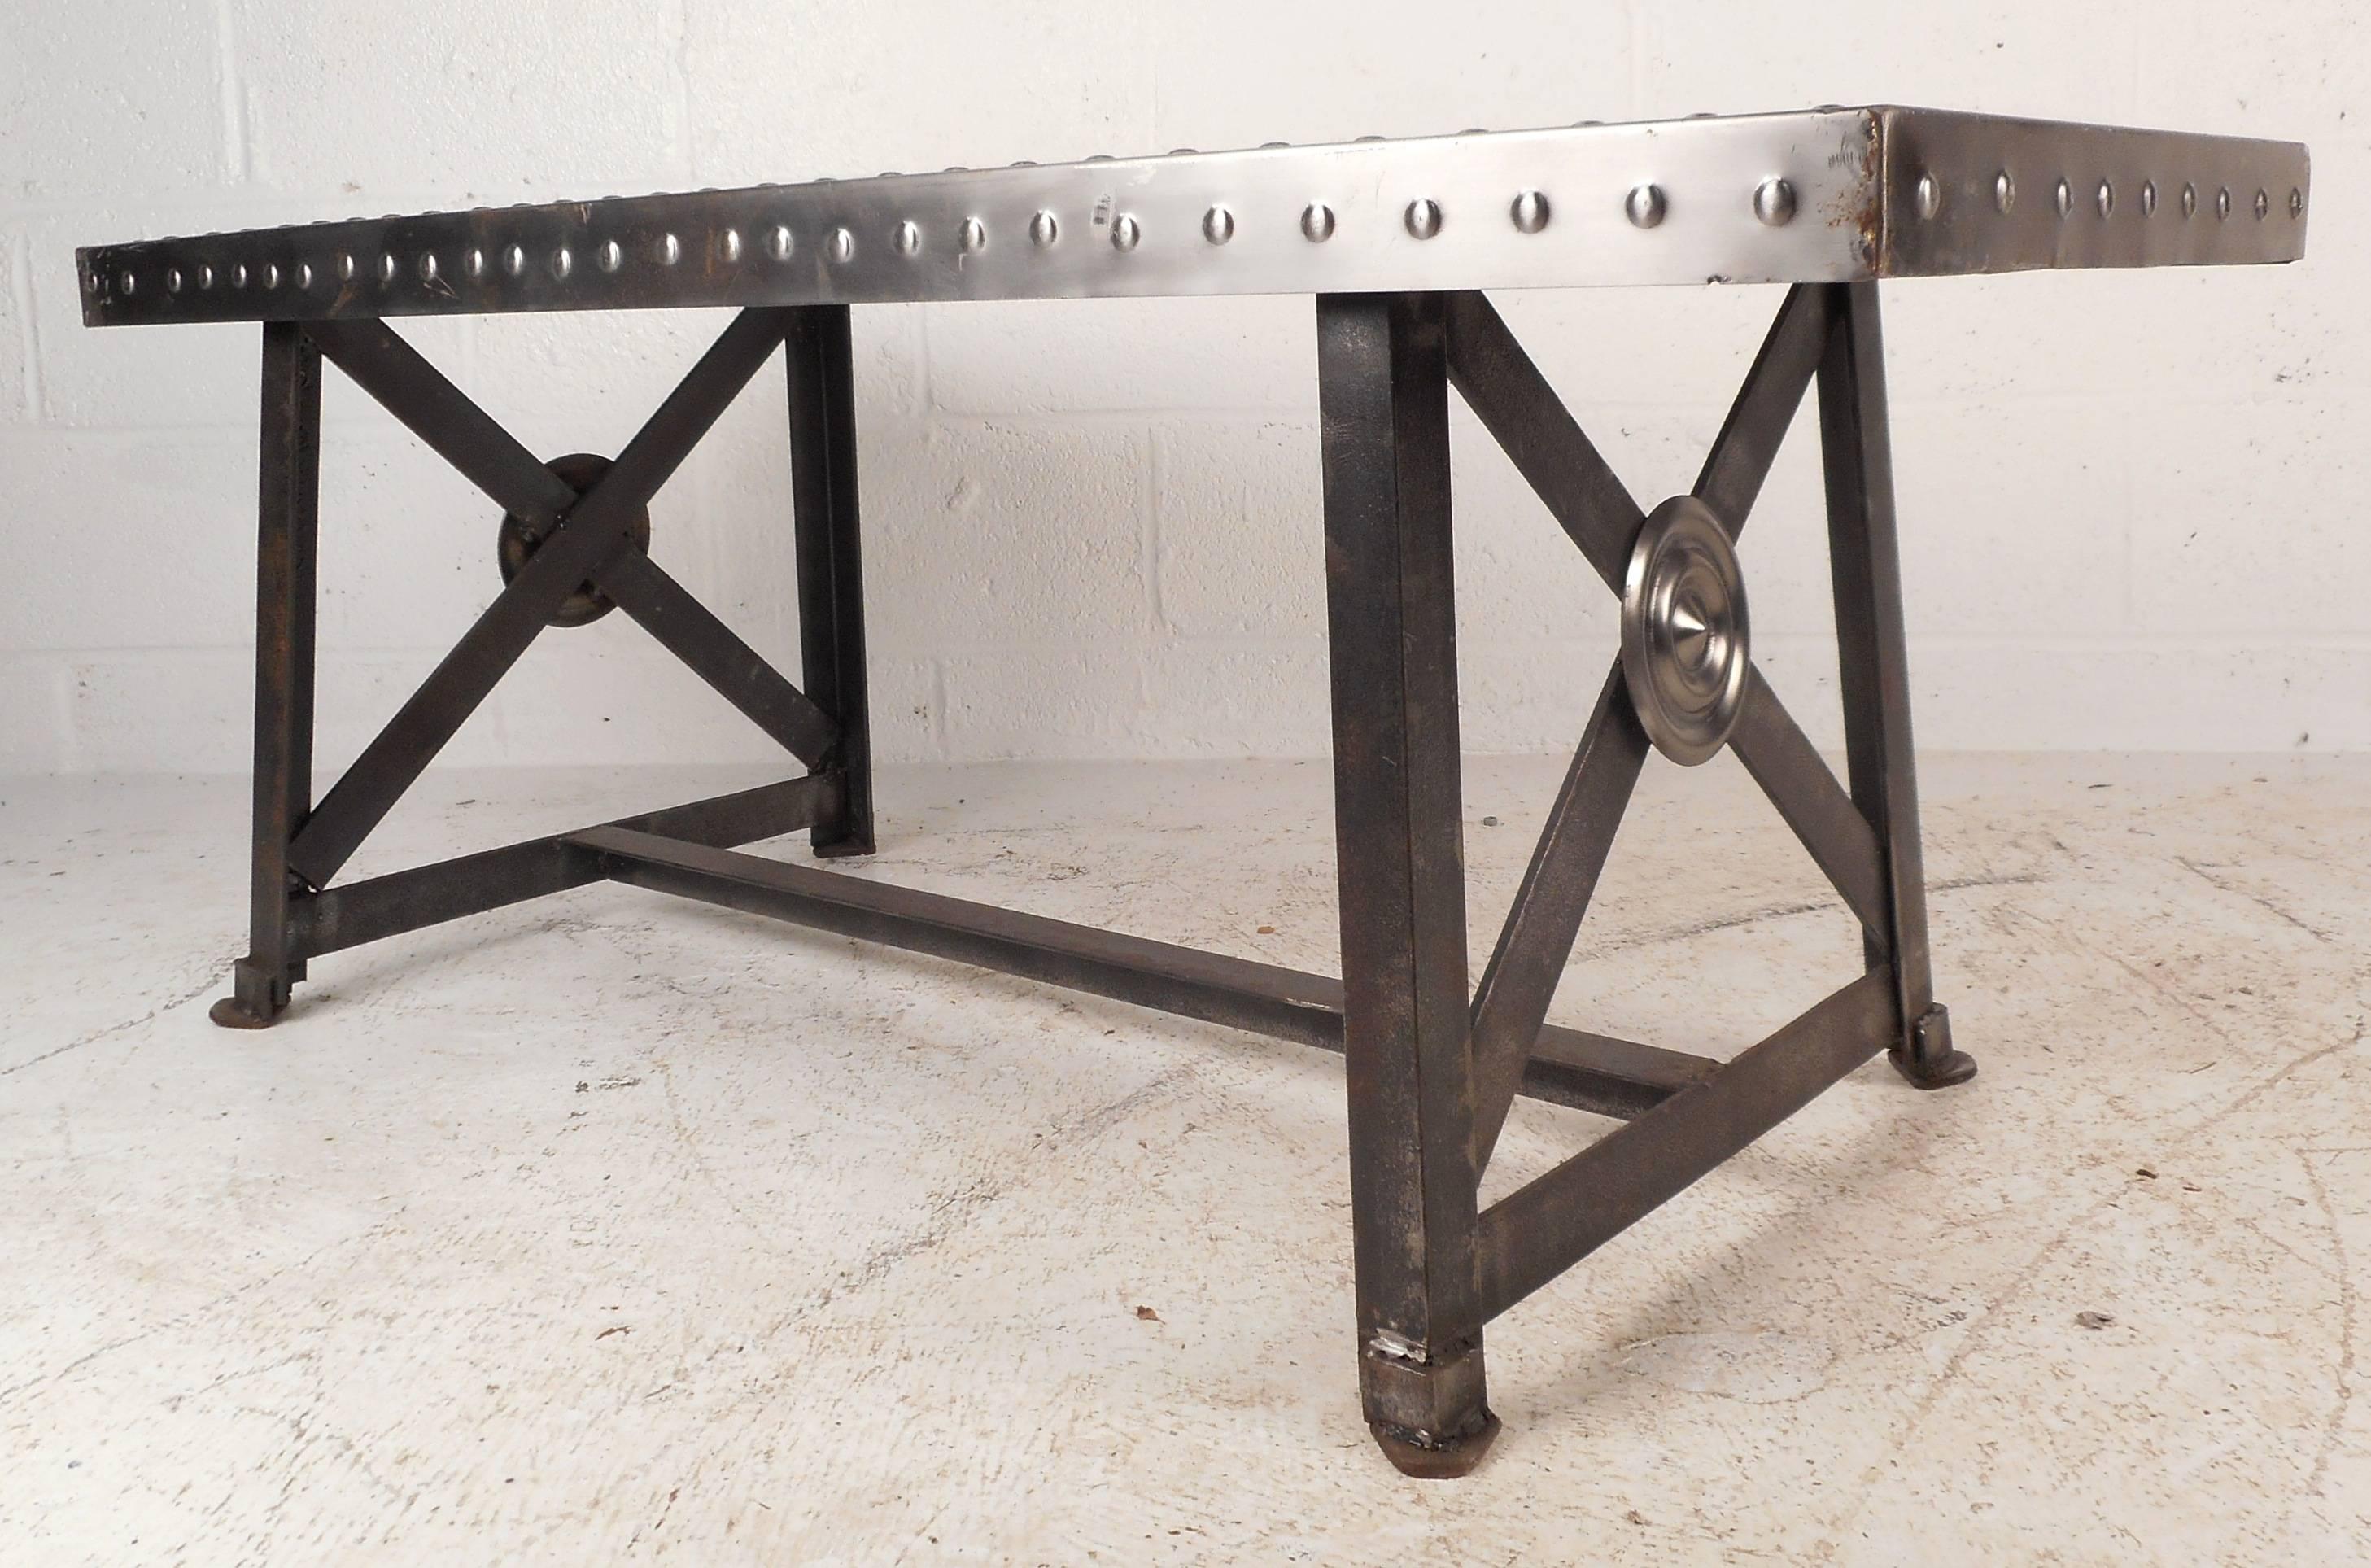 Beautiful vintage Industrial metal coffee table features a unique "X" design on the sides. The versatile piece can also be used as a bench, work table, or coffee table. Sleek design with rivets securing the edges and a heavy metal base